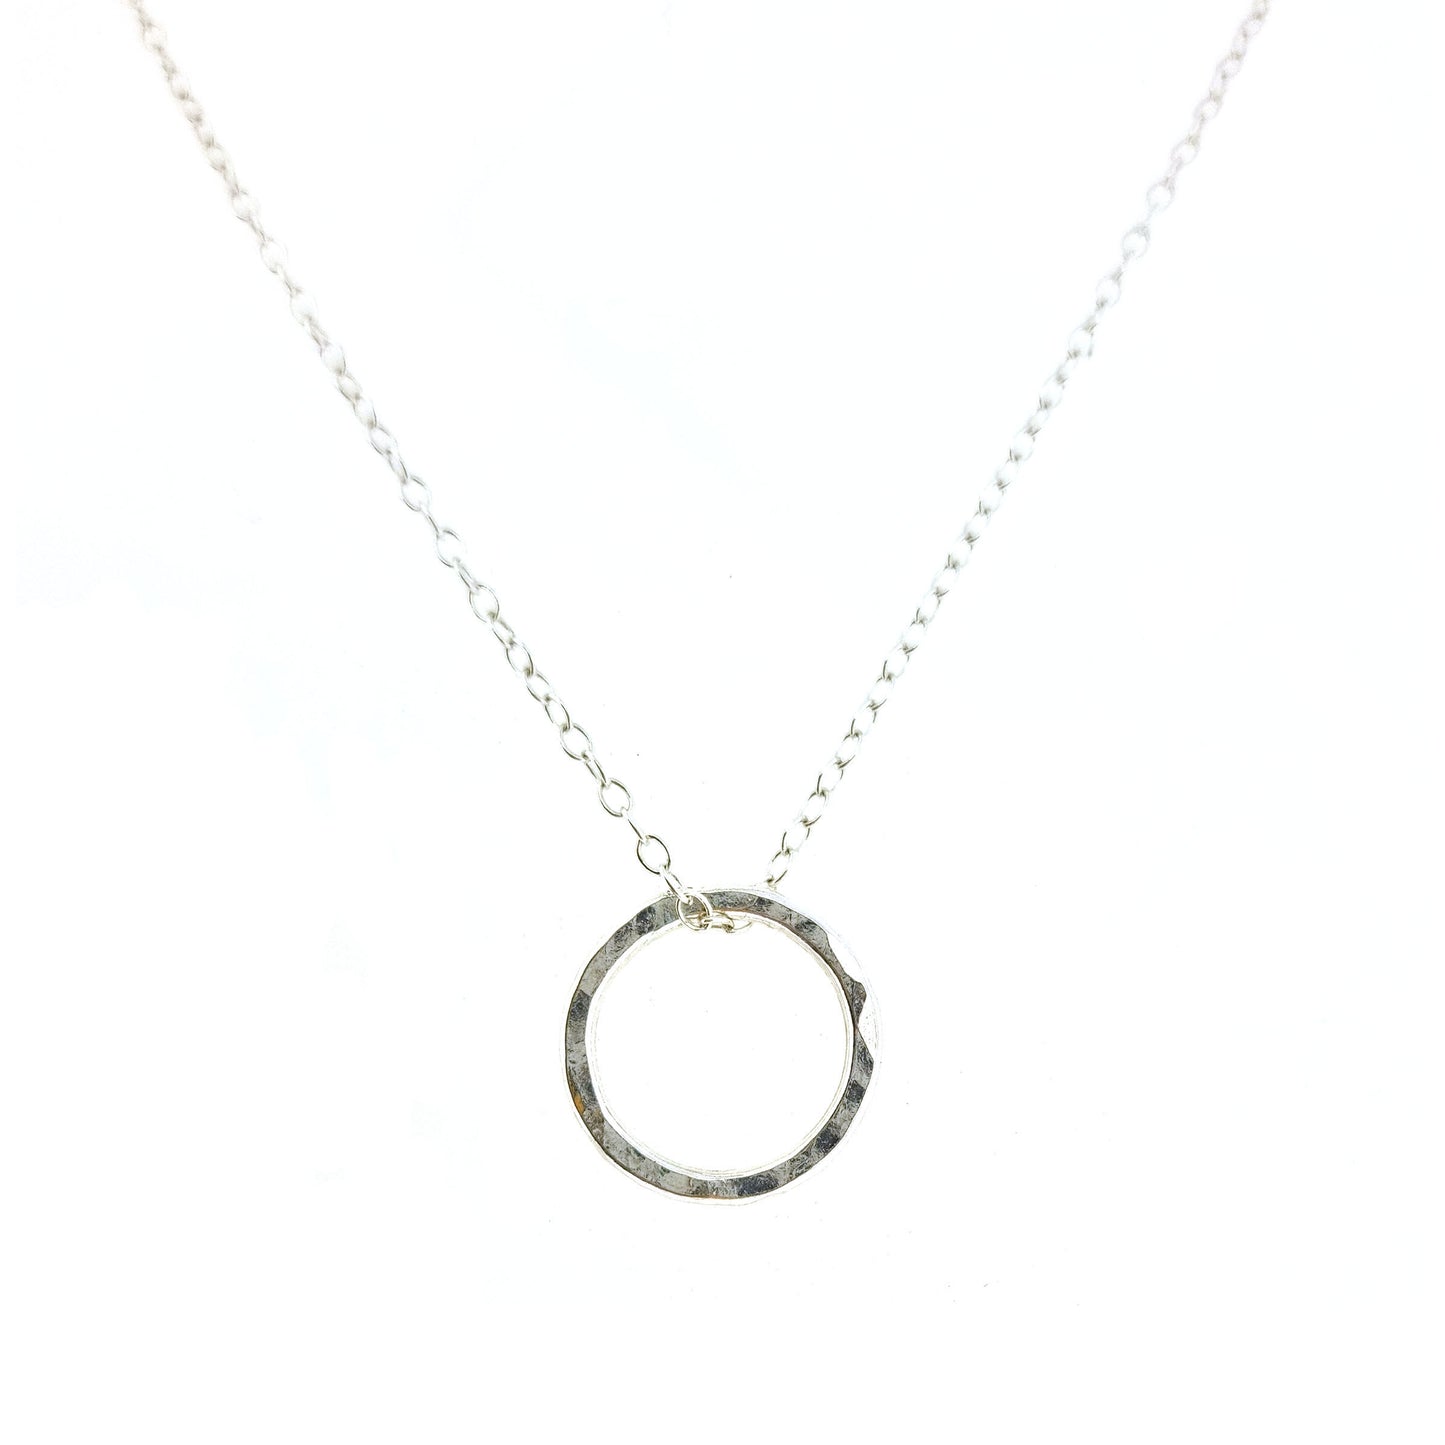 Silver hammered open circle pendant on silver chain - small